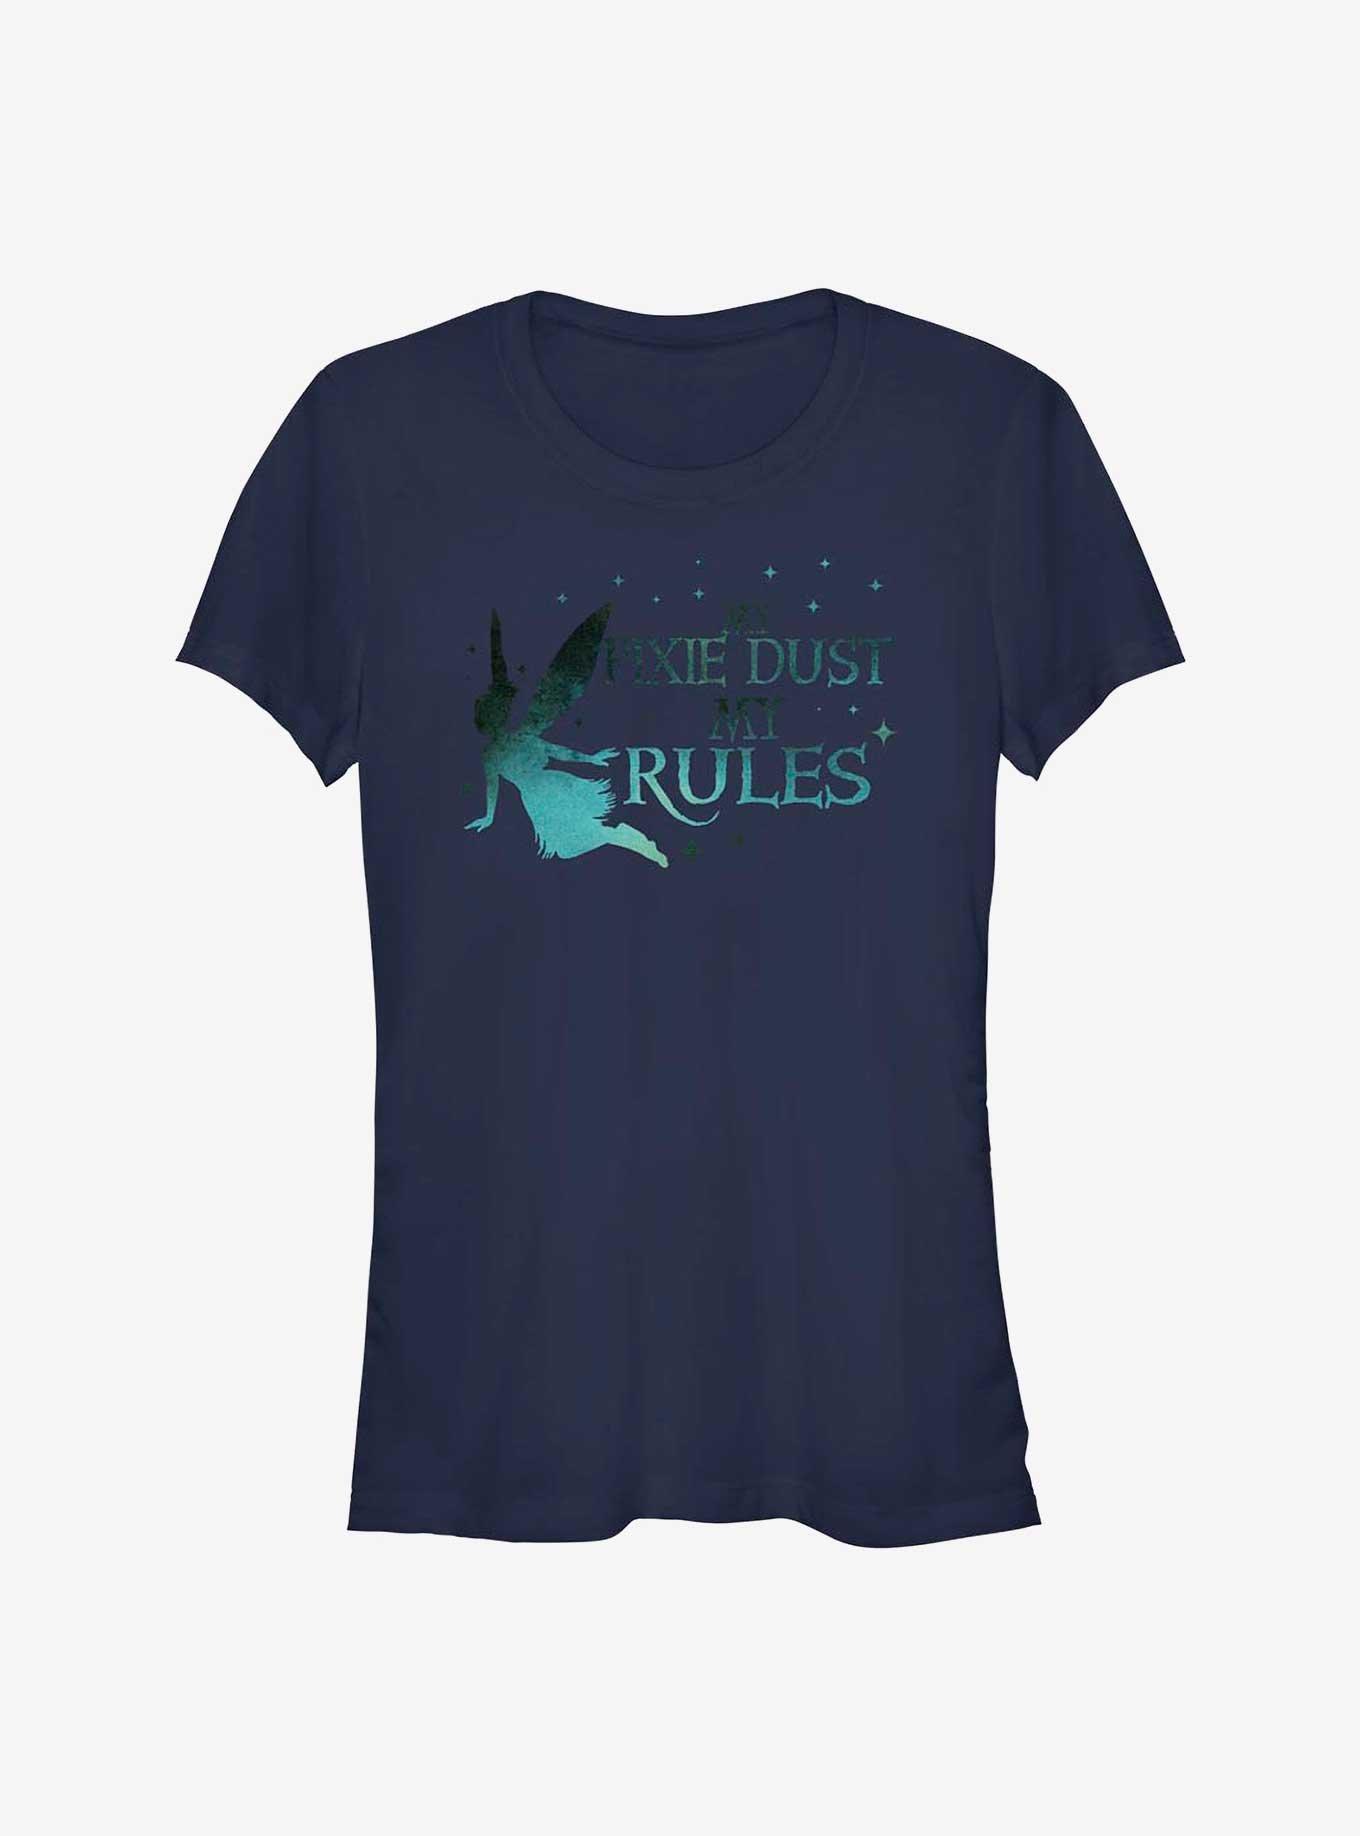 Disney Peter Pan & Wendy Tinker Bell My Pixie Dust My Rules Girls T-Shirt, , hi-res